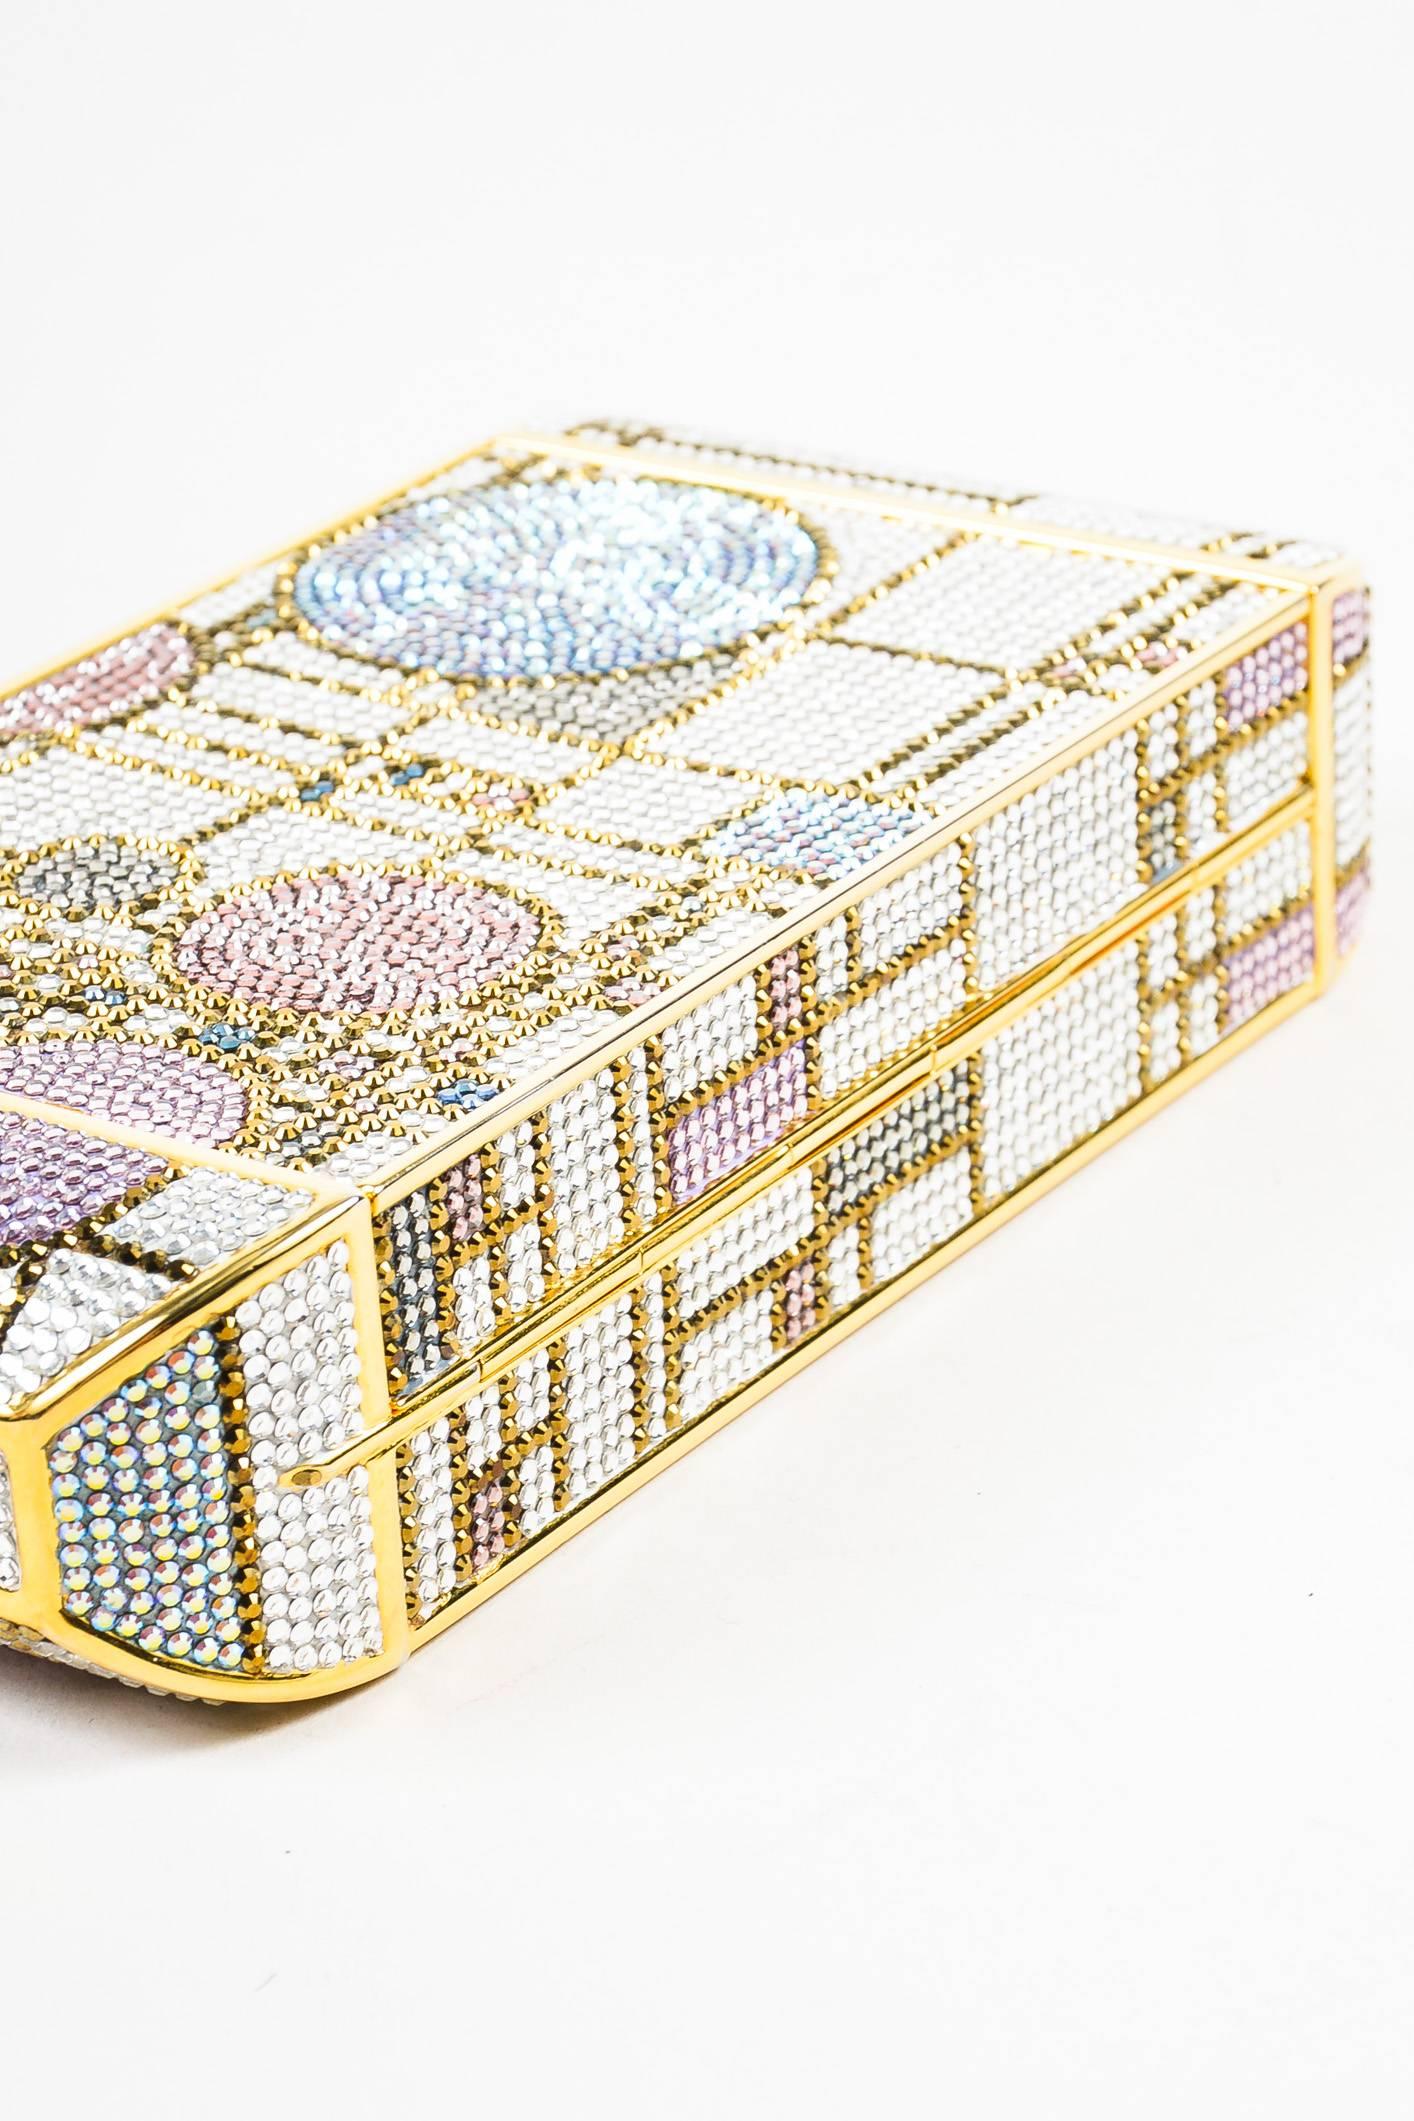 Judith Leiber Pink & Gold Tone Swarovski Crystal Geometric Patterned Minaudiere In Excellent Condition For Sale In Chicago, IL